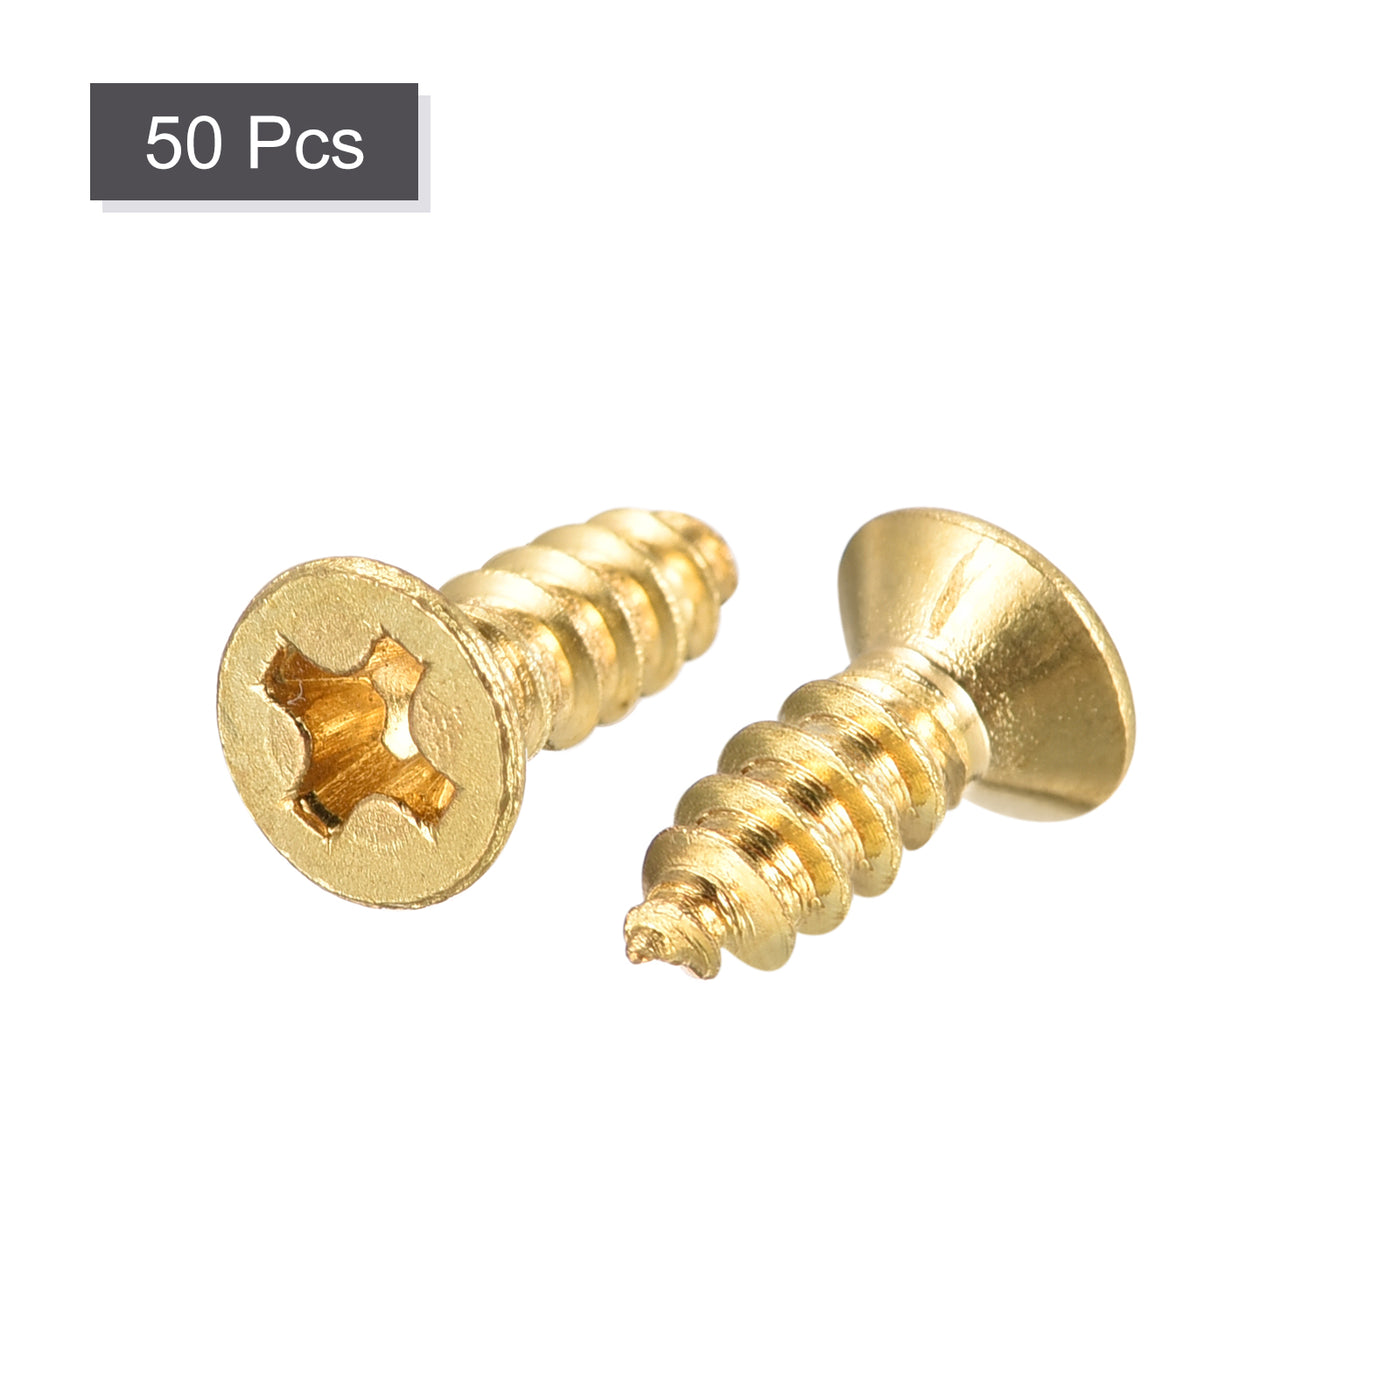 uxcell Uxcell Brass Wood Screws, M3.5x12mm Phillips Flat Head Self Tapping Connector for Door, Cabinet, Wooden Furniture 50Pcs